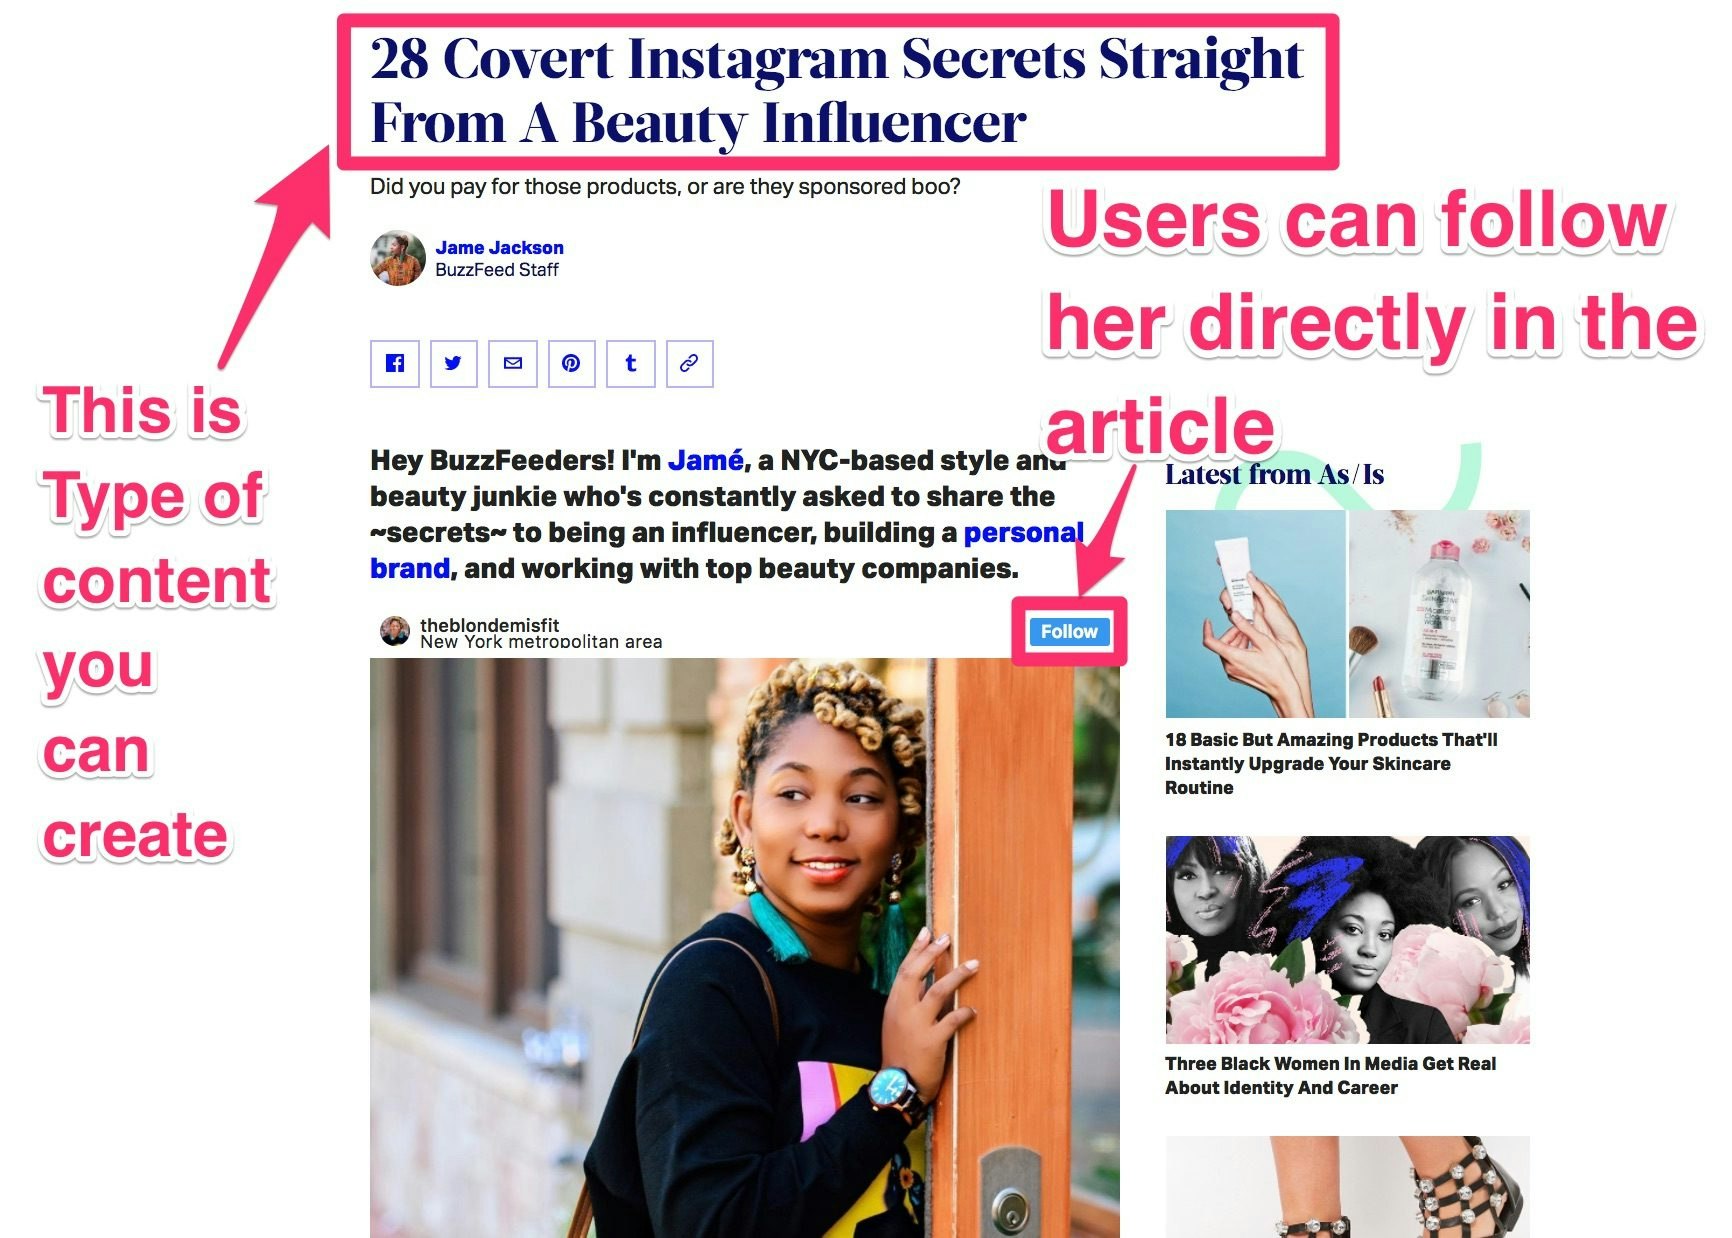 Using Buzzfeed to get an Instagram followers increase